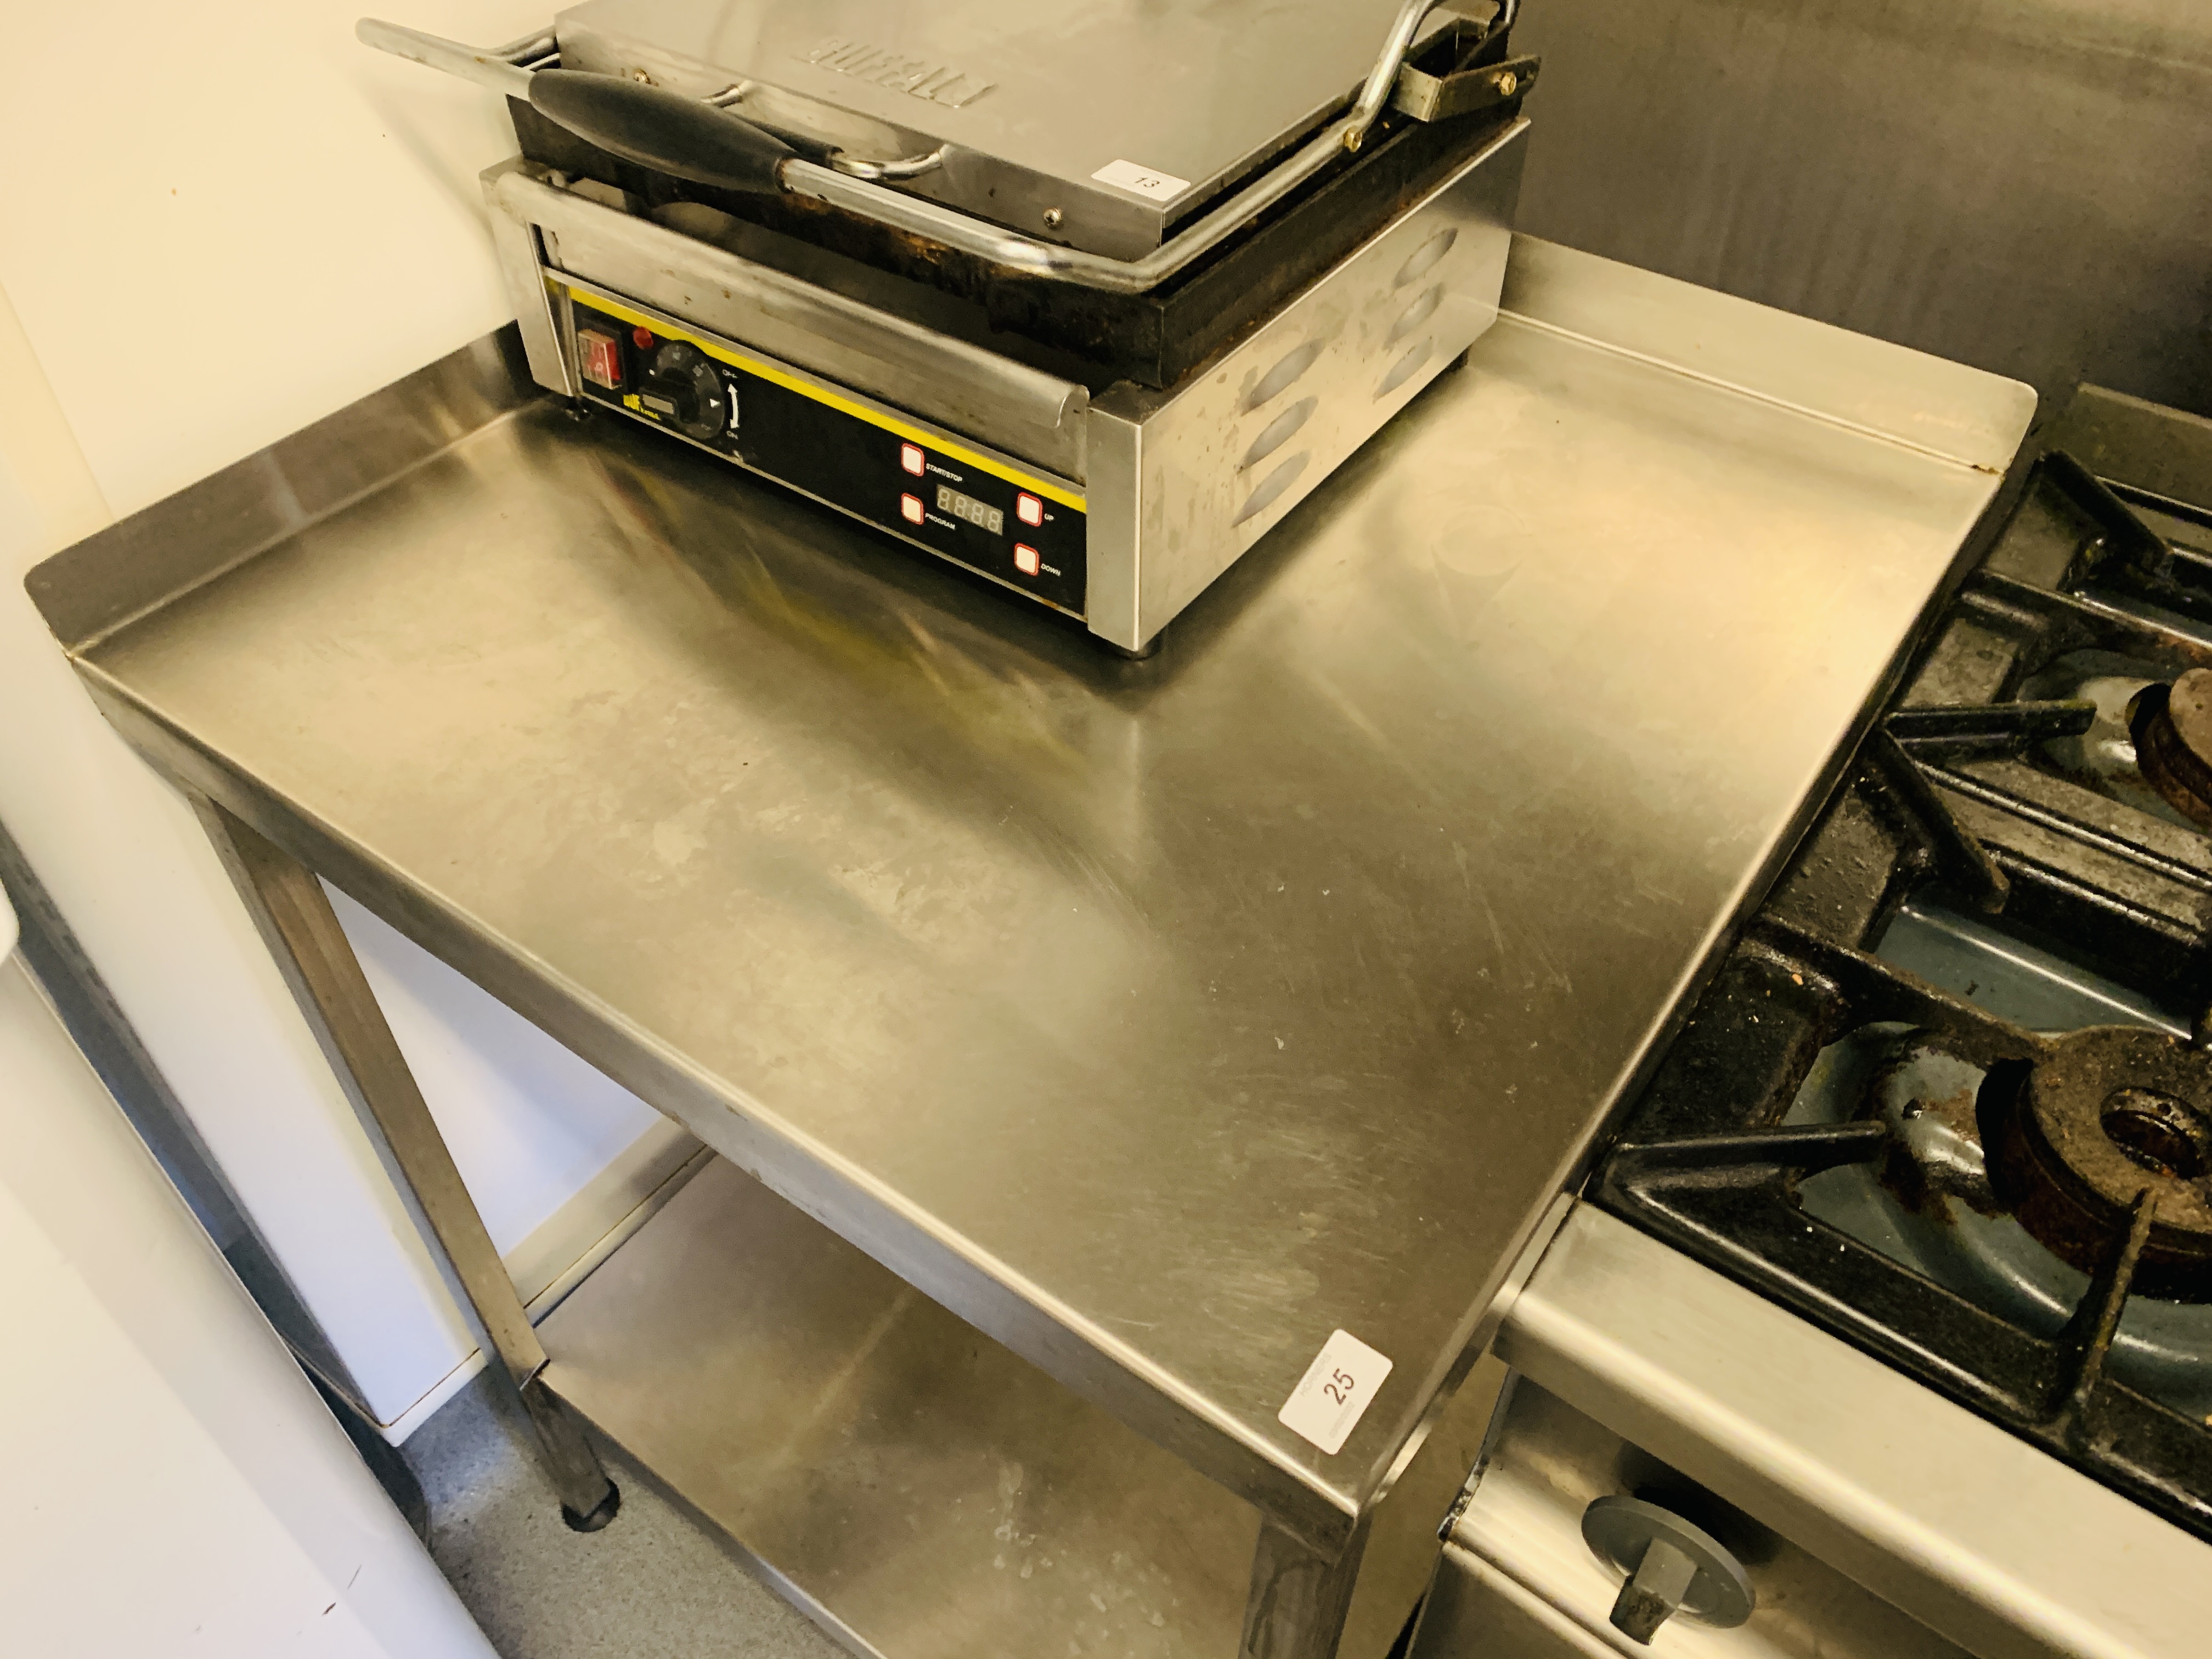 2 X STAINLESS STEEL TWO TIER CORNER CATERING PREPARATION TABLE - W 70CM. D 70CM. - Image 2 of 6